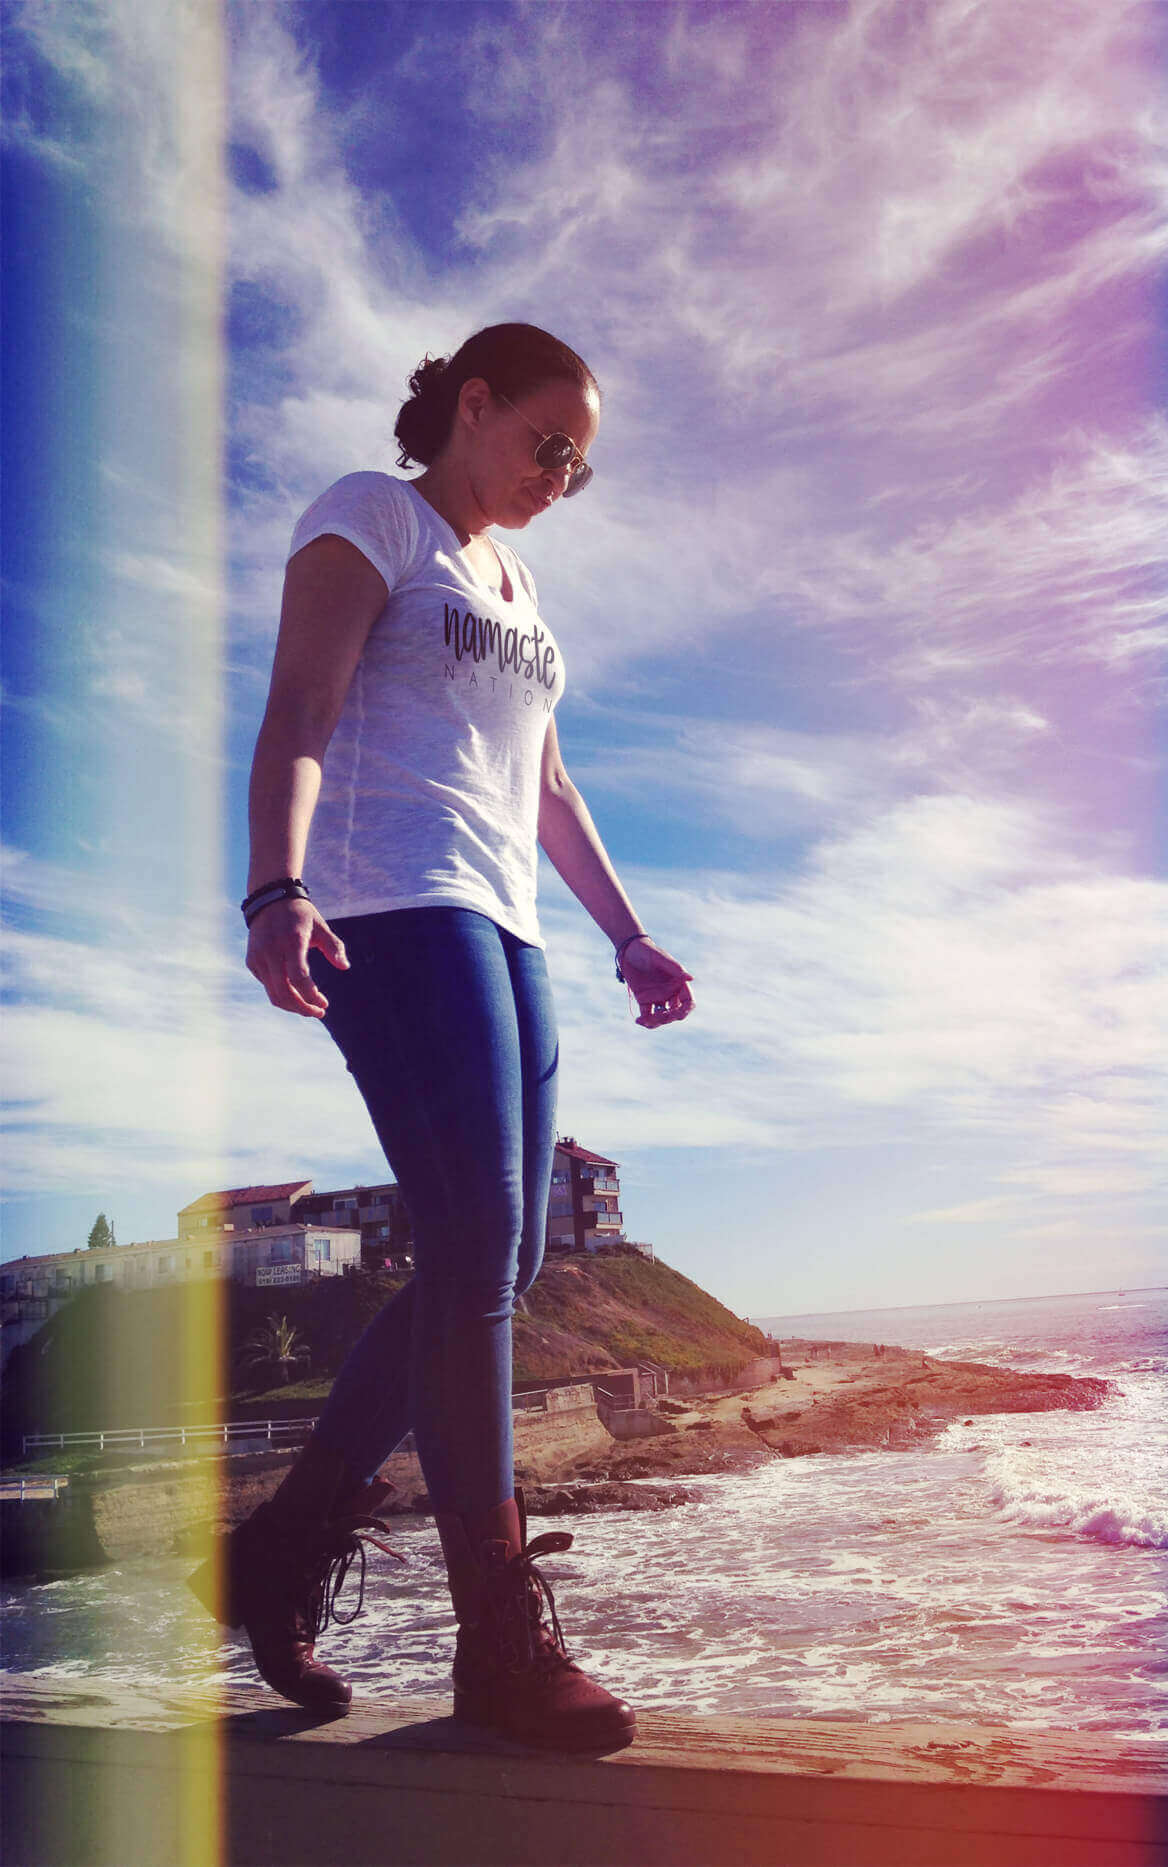 Kristine Mason Broadus, Vice president and owner of Puzzle Pieces Marketing walking on the pier in the sun in san diego california